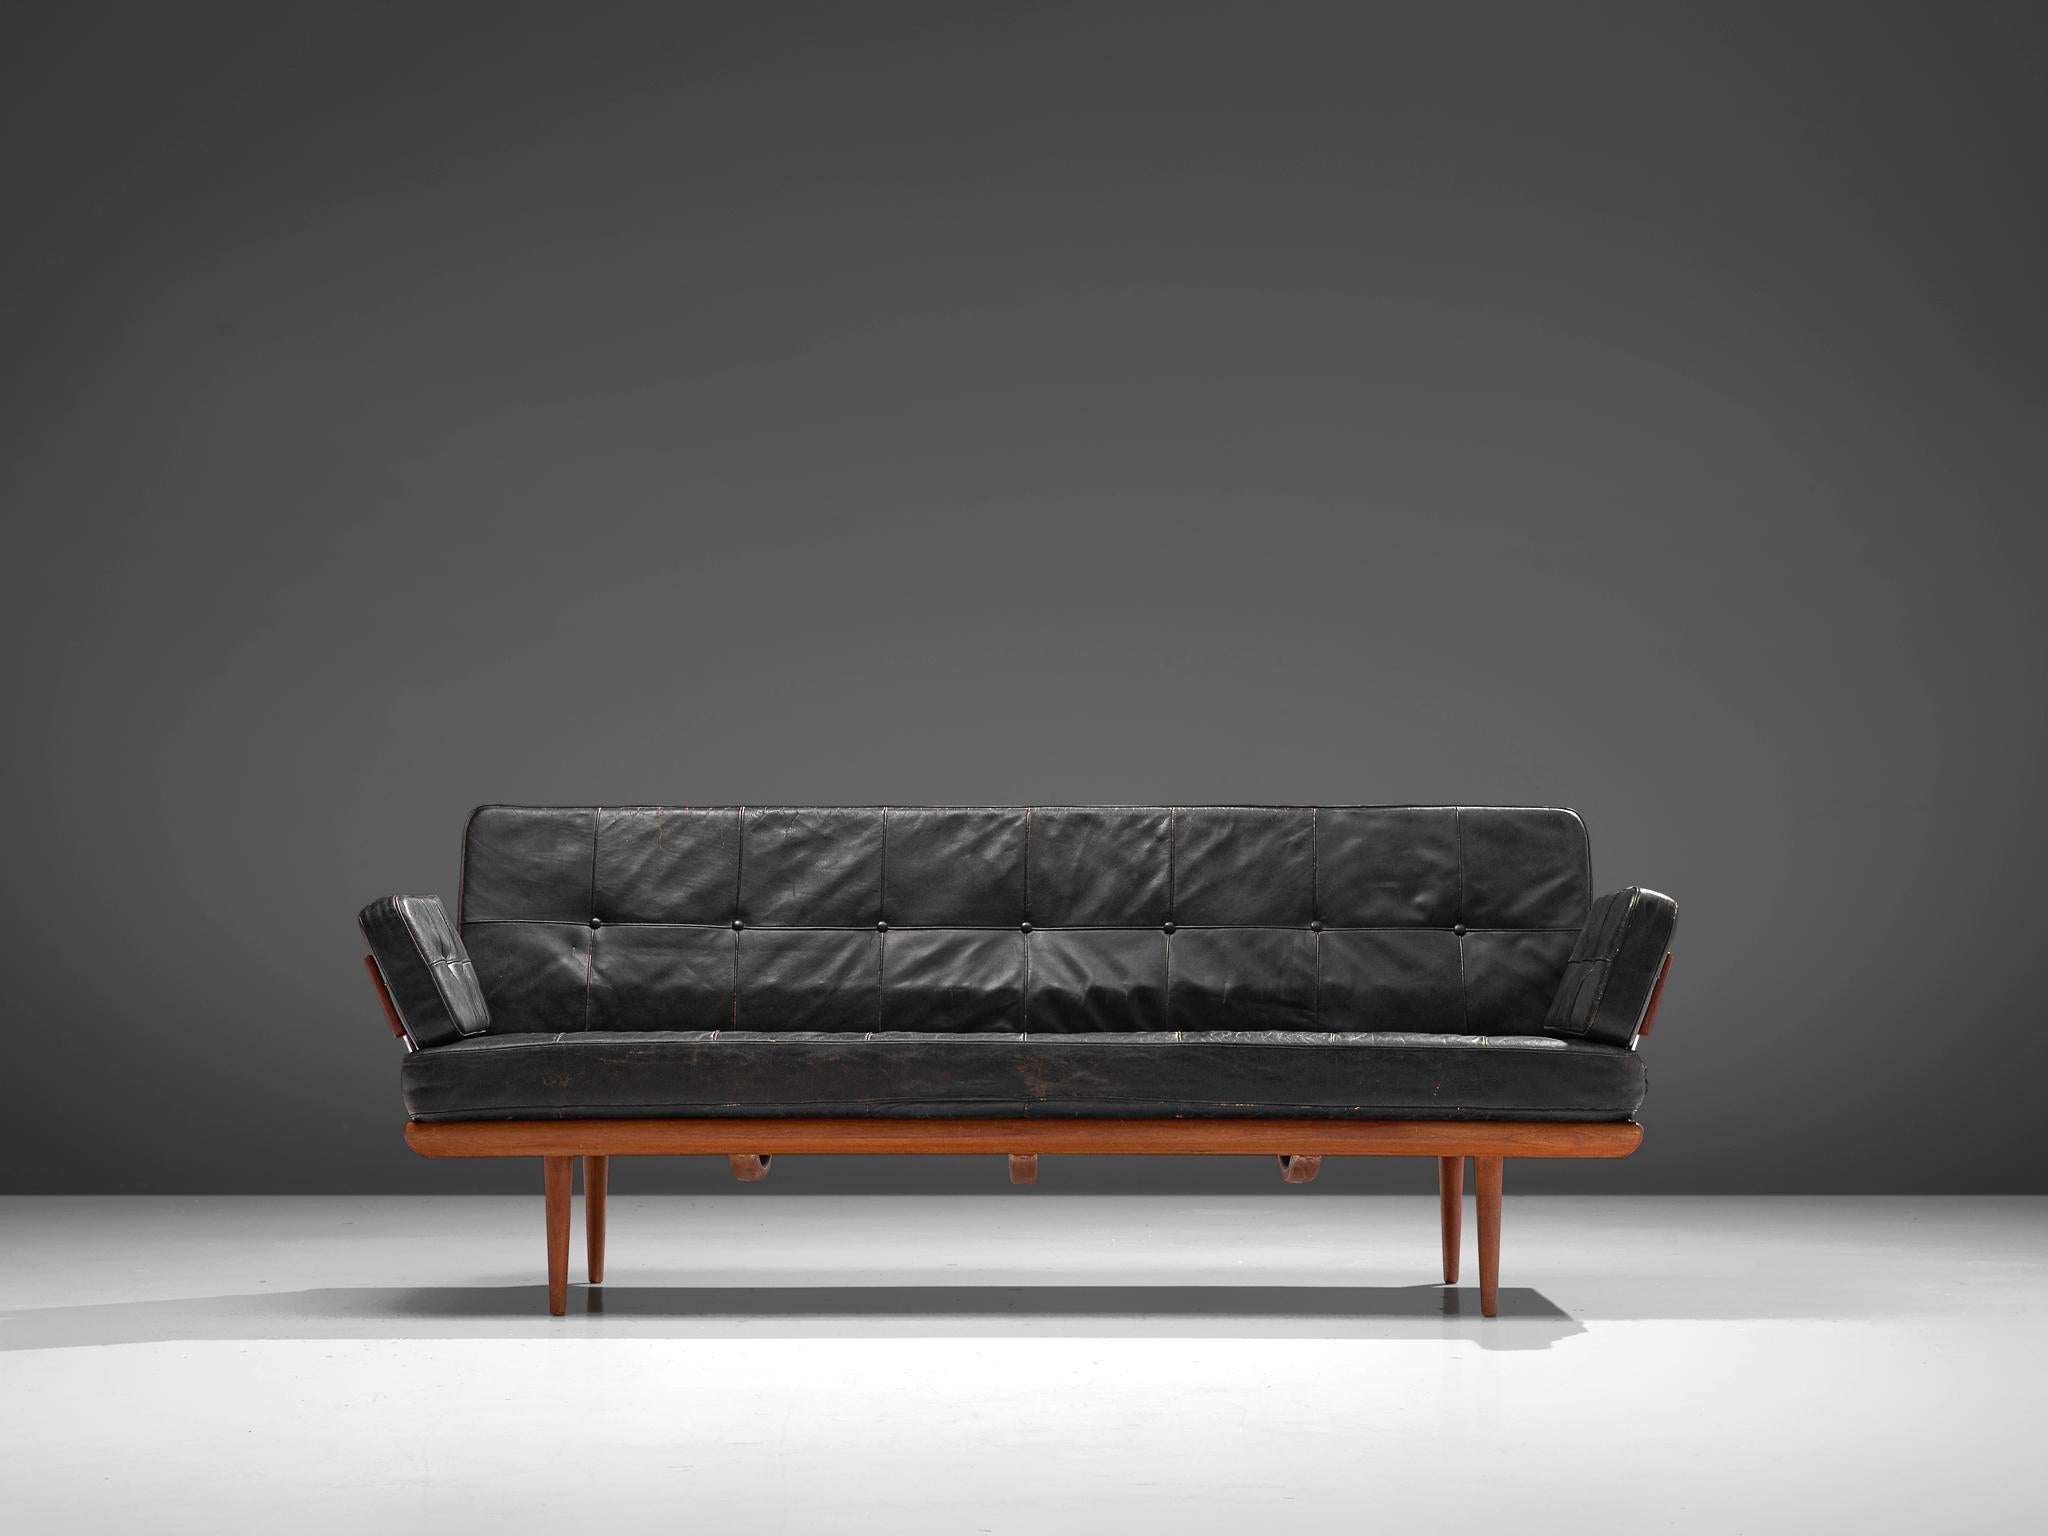 Peter Hvidt and Orla Mølgaard-Nielsen for France & Søn, 'Minerva' daybed, teak, metal and leather, Denmark, design 1957, production 1960s.

This sofa and daybed 'Minerva', named after the goddess of wisdom, is a true midcentury Classic by the design